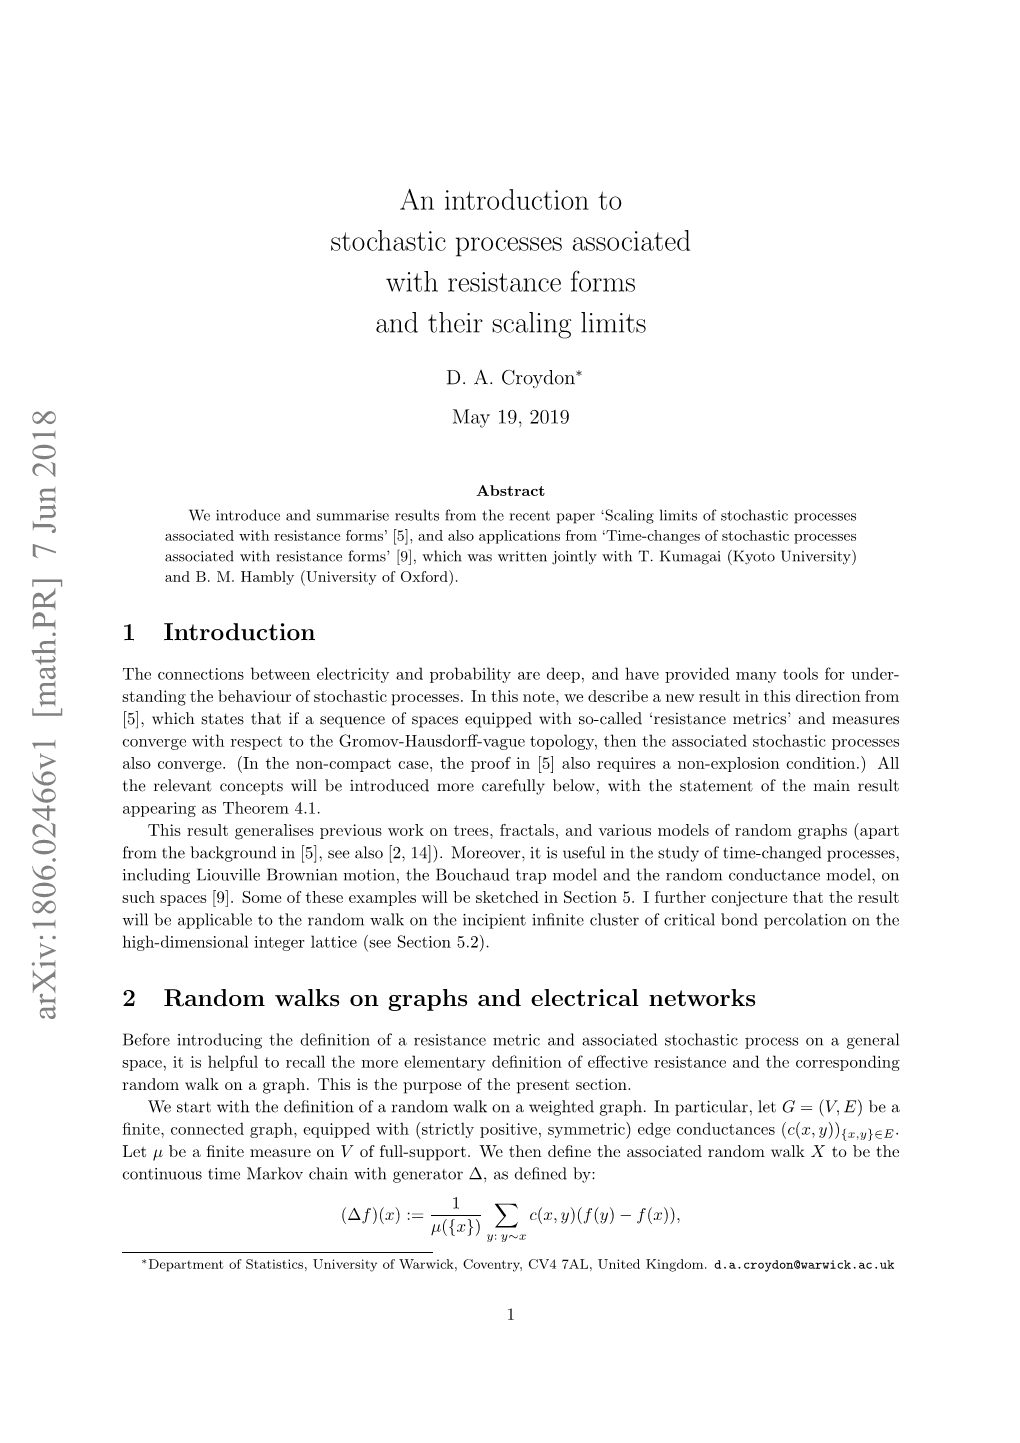 An Introduction to Stochastic Processes Associated With